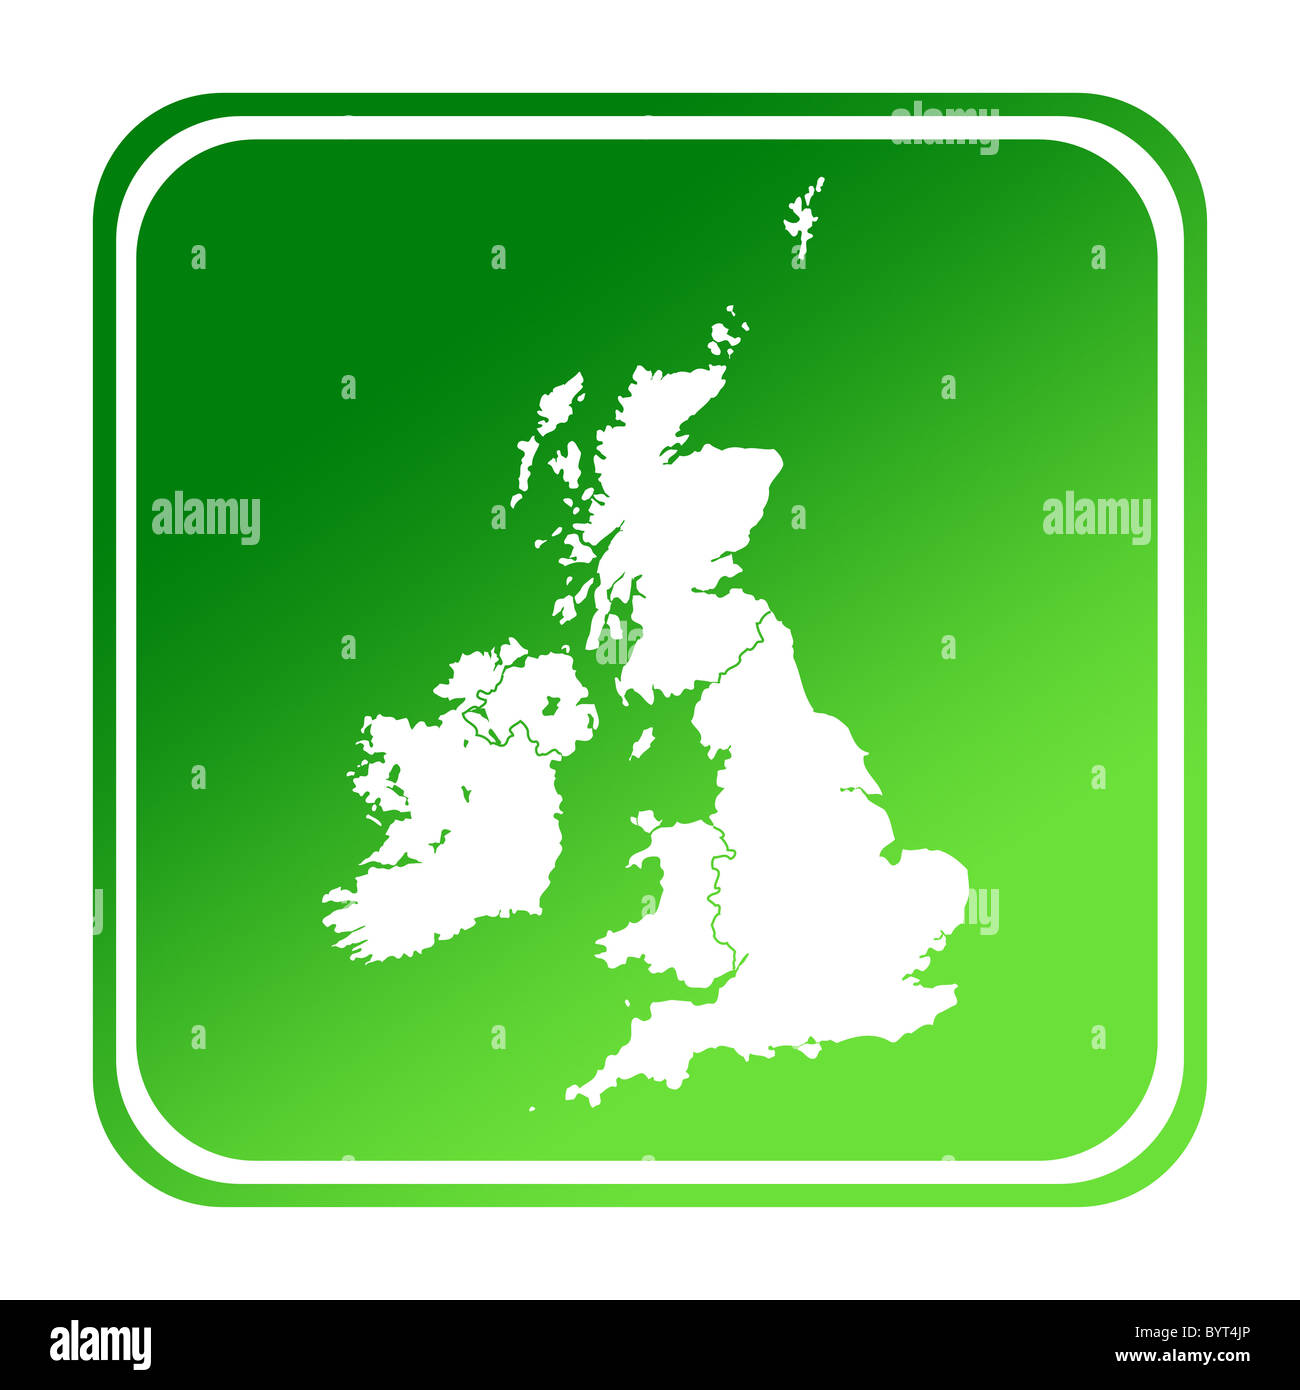 UK or England map button in gradient green; isolated on white background with clipping path. Stock Photo